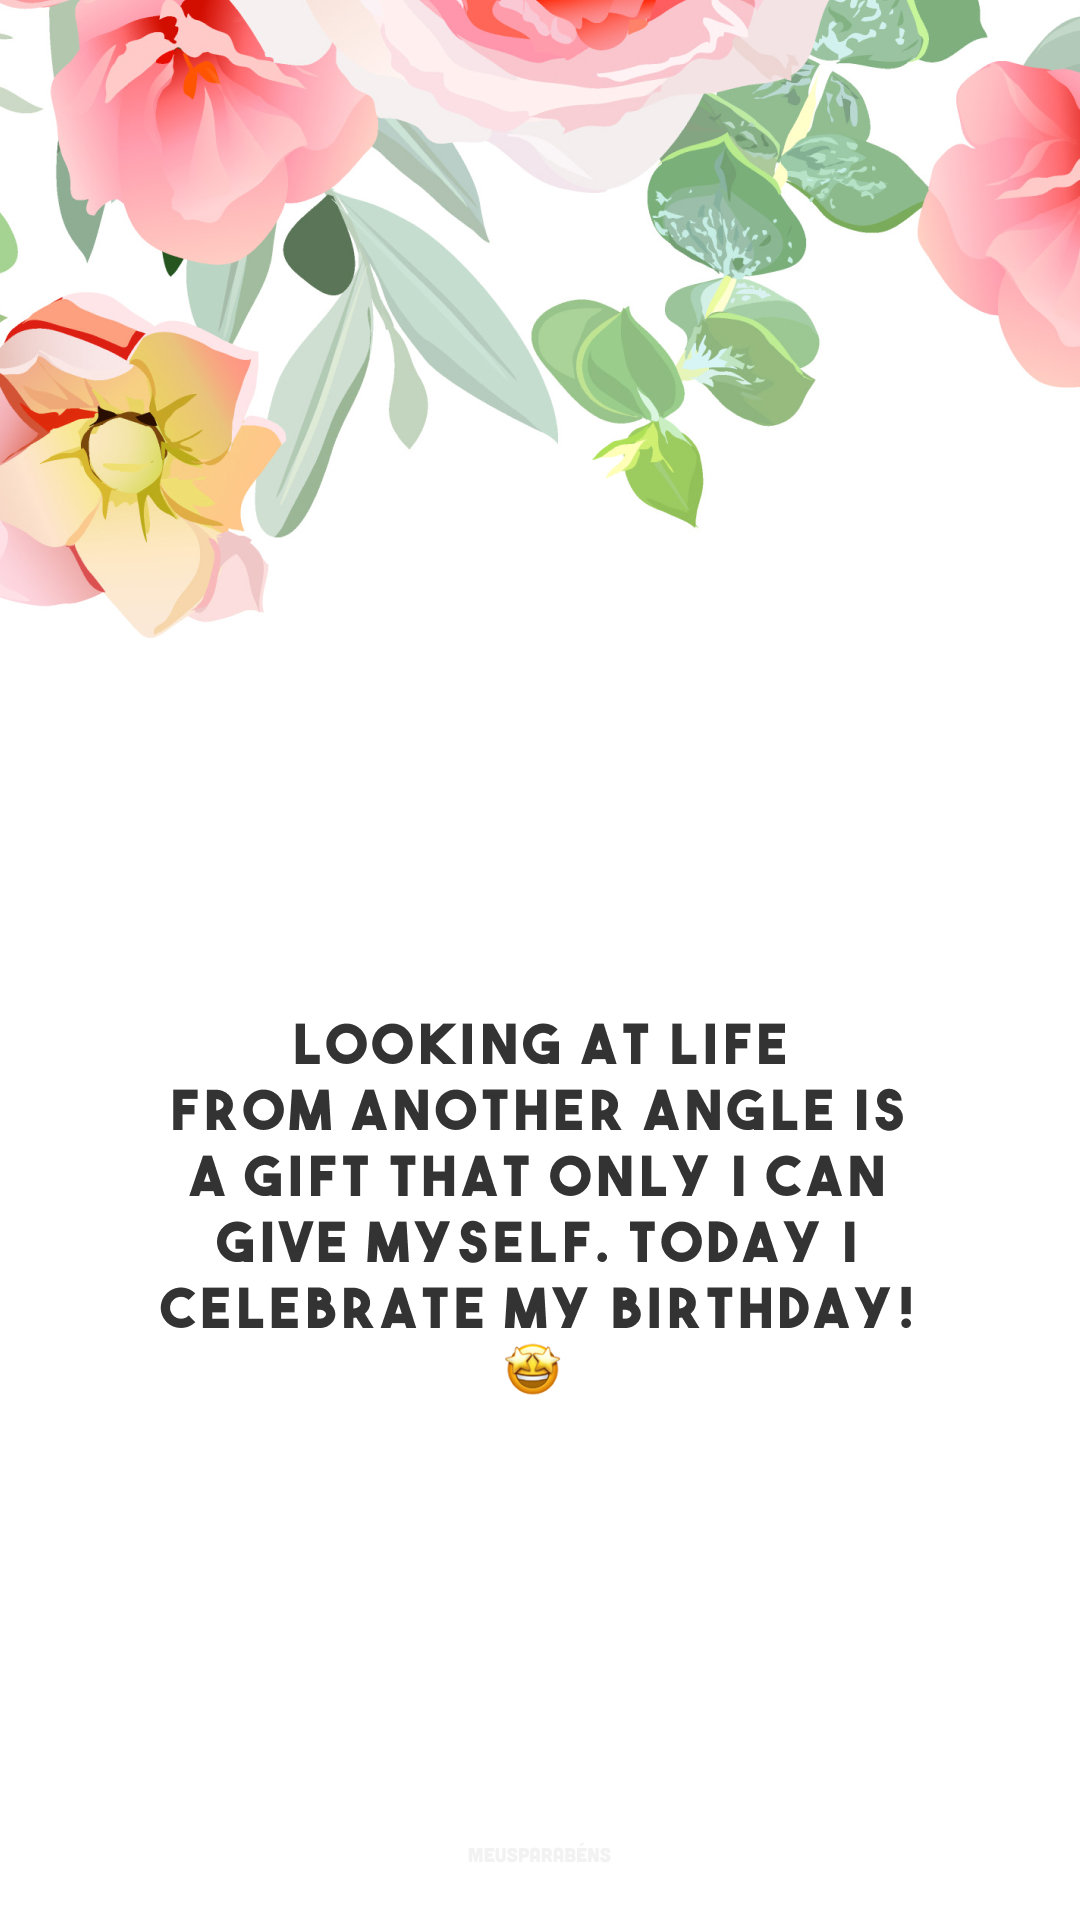 Looking at life from another angle is a gift that only I can give myself. Today I celebrate my birthday! 🤩

<p>(Olhar a vida de outro ângulo é um presente que só eu mesmo posso me dar. Hoje comemoro meu aniversário!)<p>